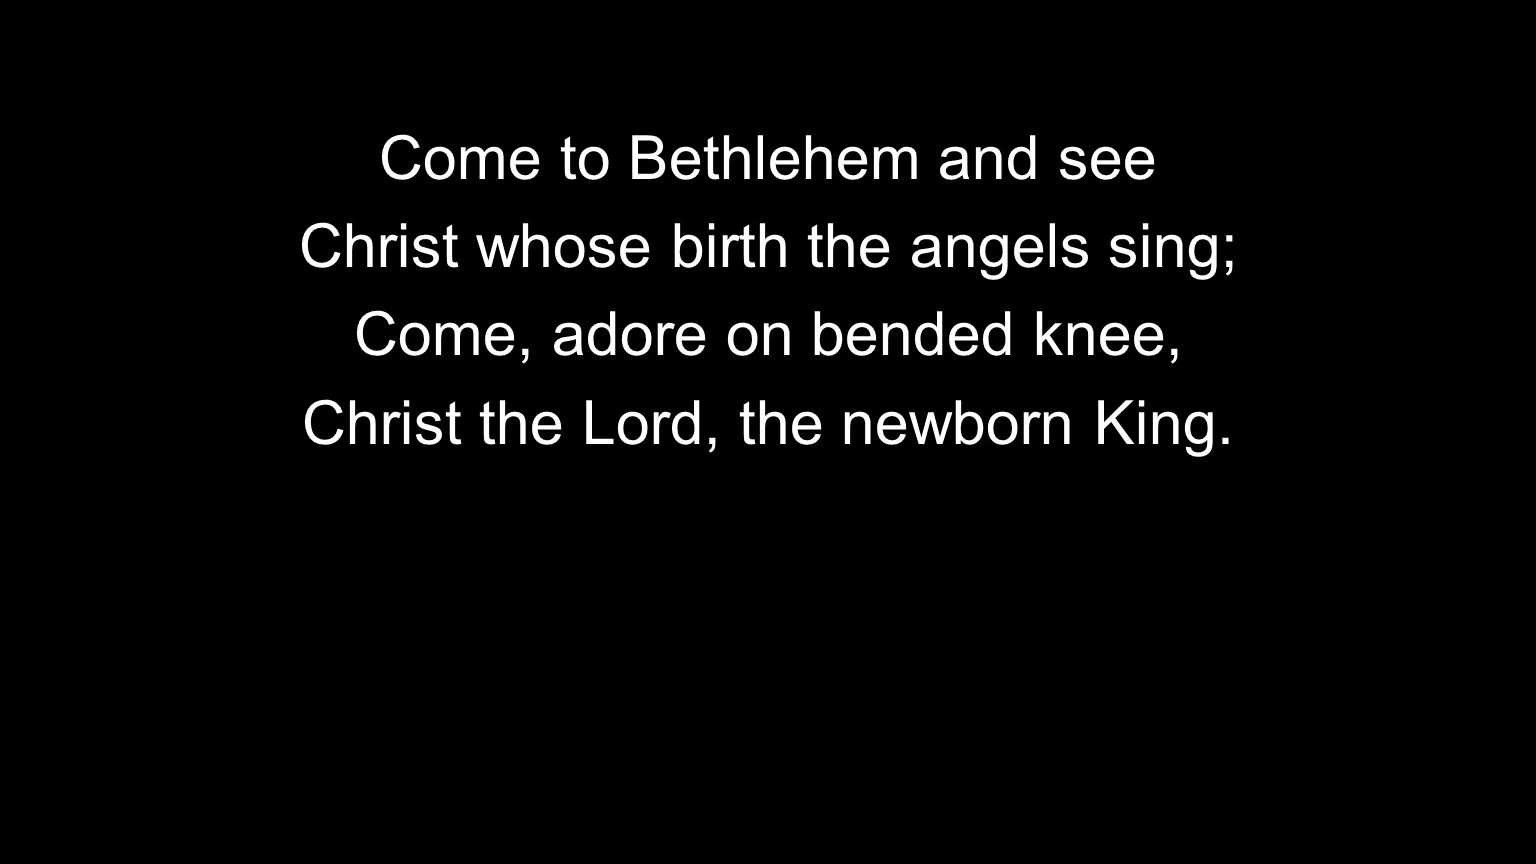 Come to Bethlehem and see Christ whose birth the angels sing; Come, adore on bended knee, Christ the Lord, the newborn King.